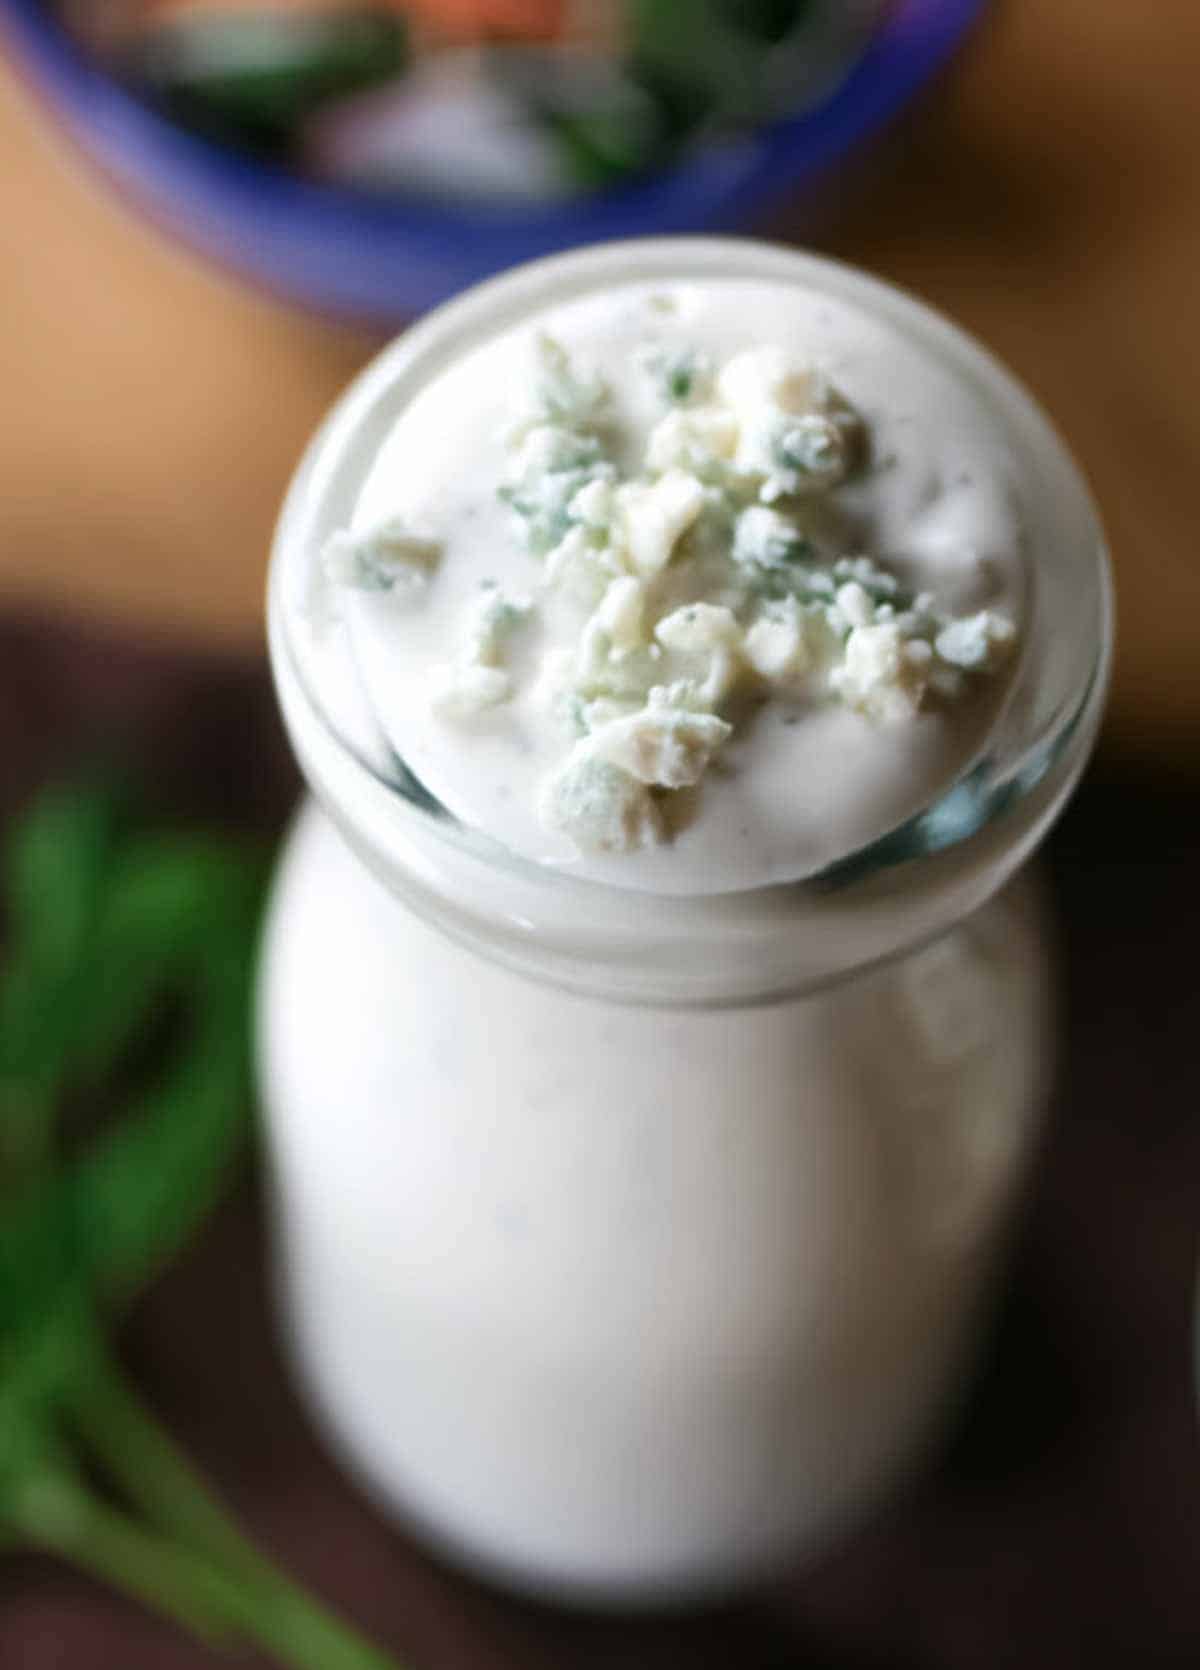 Top of bottle of keto blue cheese dressing showing chunks of blue cheese.